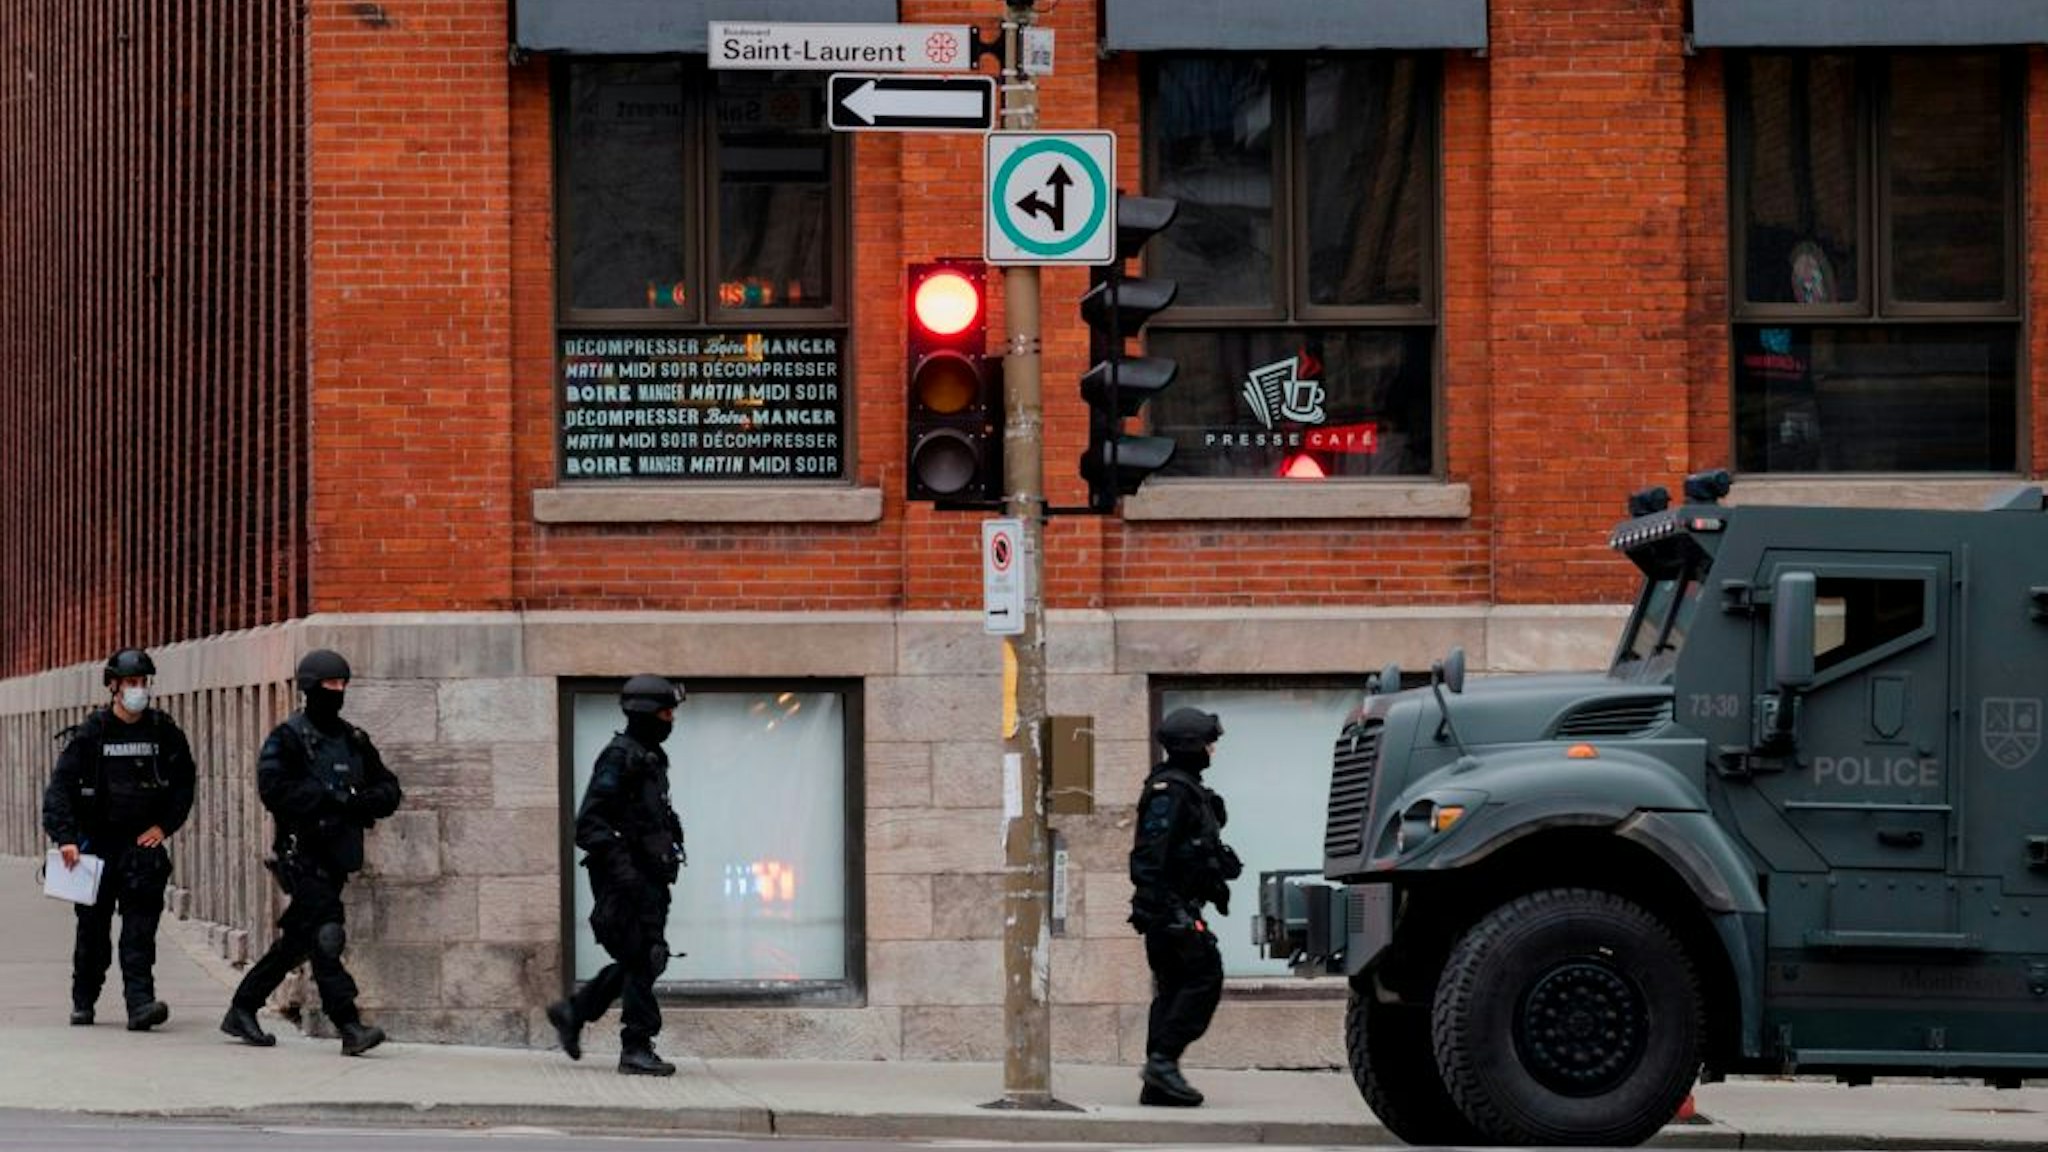 Montreal police respond to a possible hostage-taking at the Ubisoft office in the Mile End, on the corner of Saint-Laurent and Saint-Viateur Sts., in Montreal, Quebec on November 13, 2020.